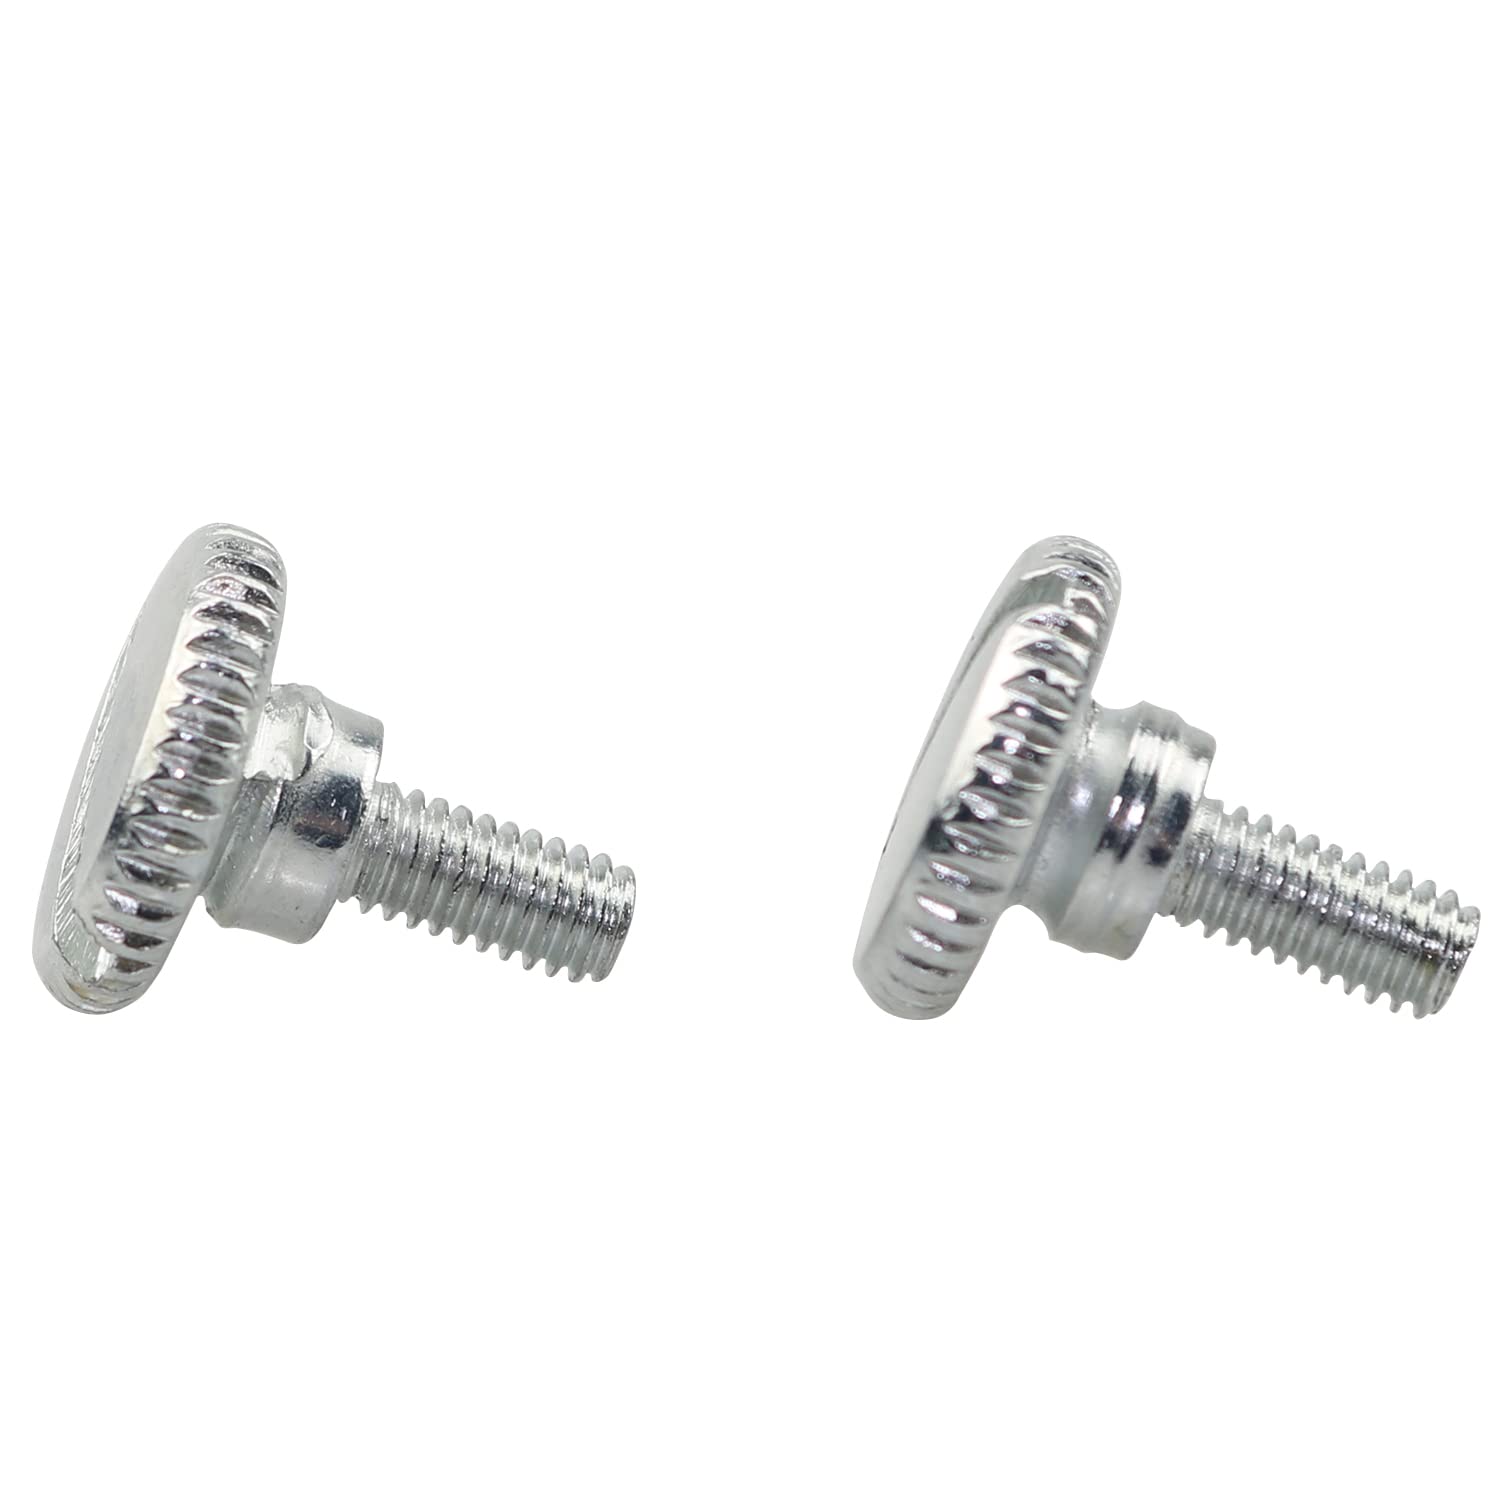 LUORNG 2pcs Sewing Machine Presser Foot Screws Feet Thumb Screws Bulk Clamp Plate Screws M3x15mm Stainless Steel Needle Clamp Set Screw for Home Sewing Machine